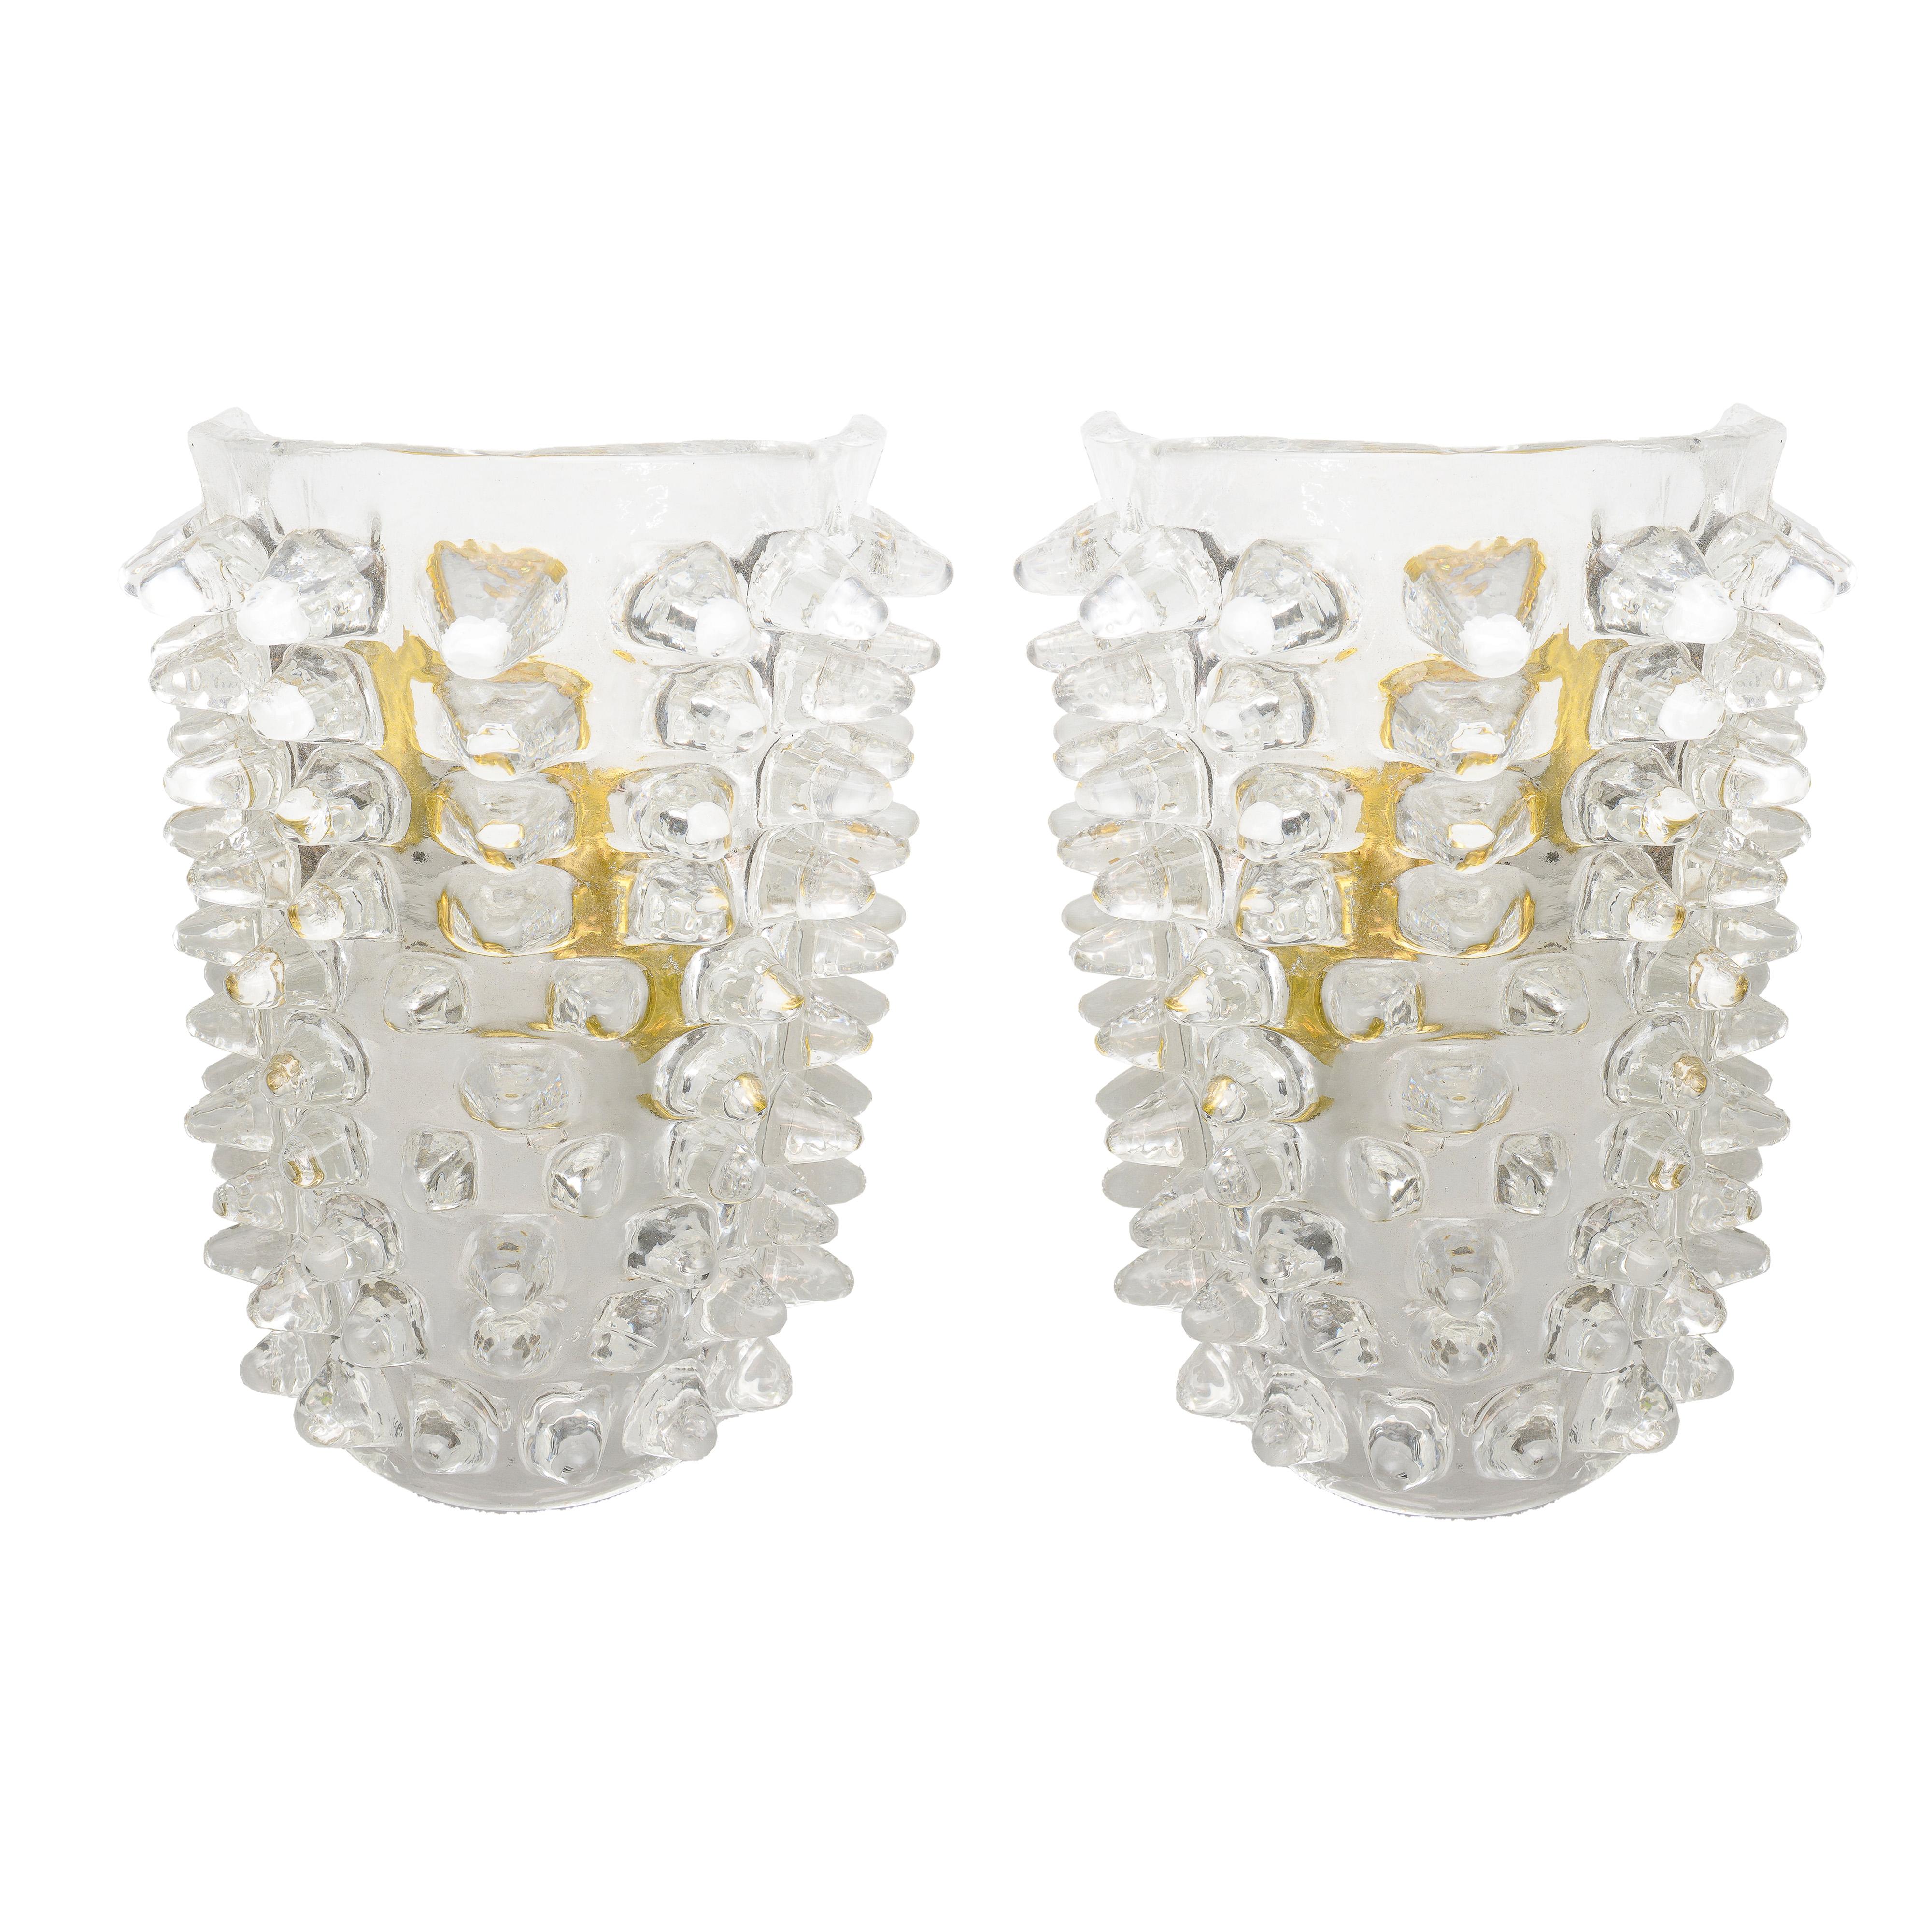 Contemporary Murano glass sconces in the manner of Barovier Toso. Set of 2. Can be made to order.